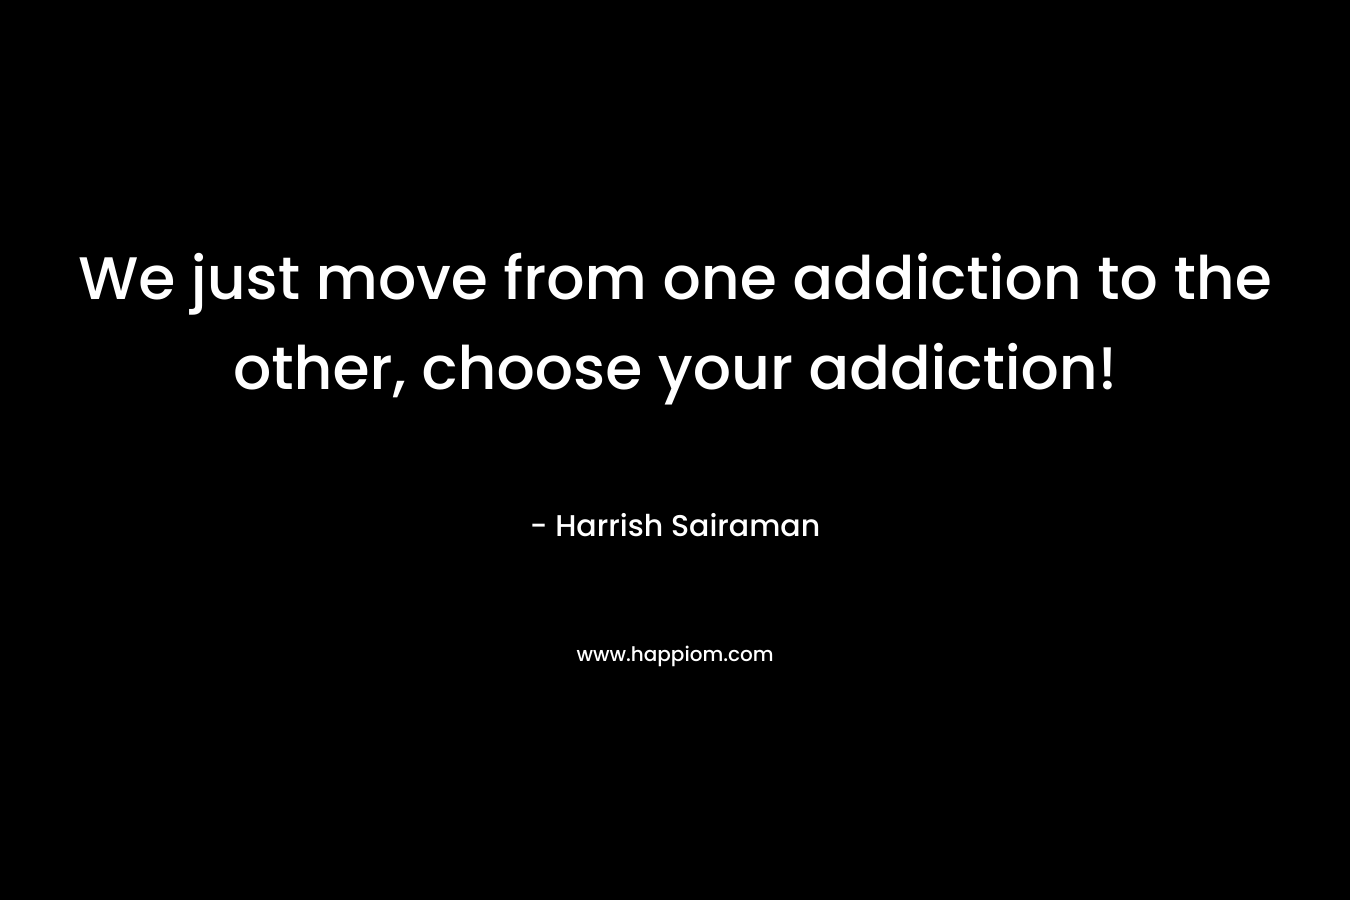 We just move from one addiction to the other, choose your addiction!